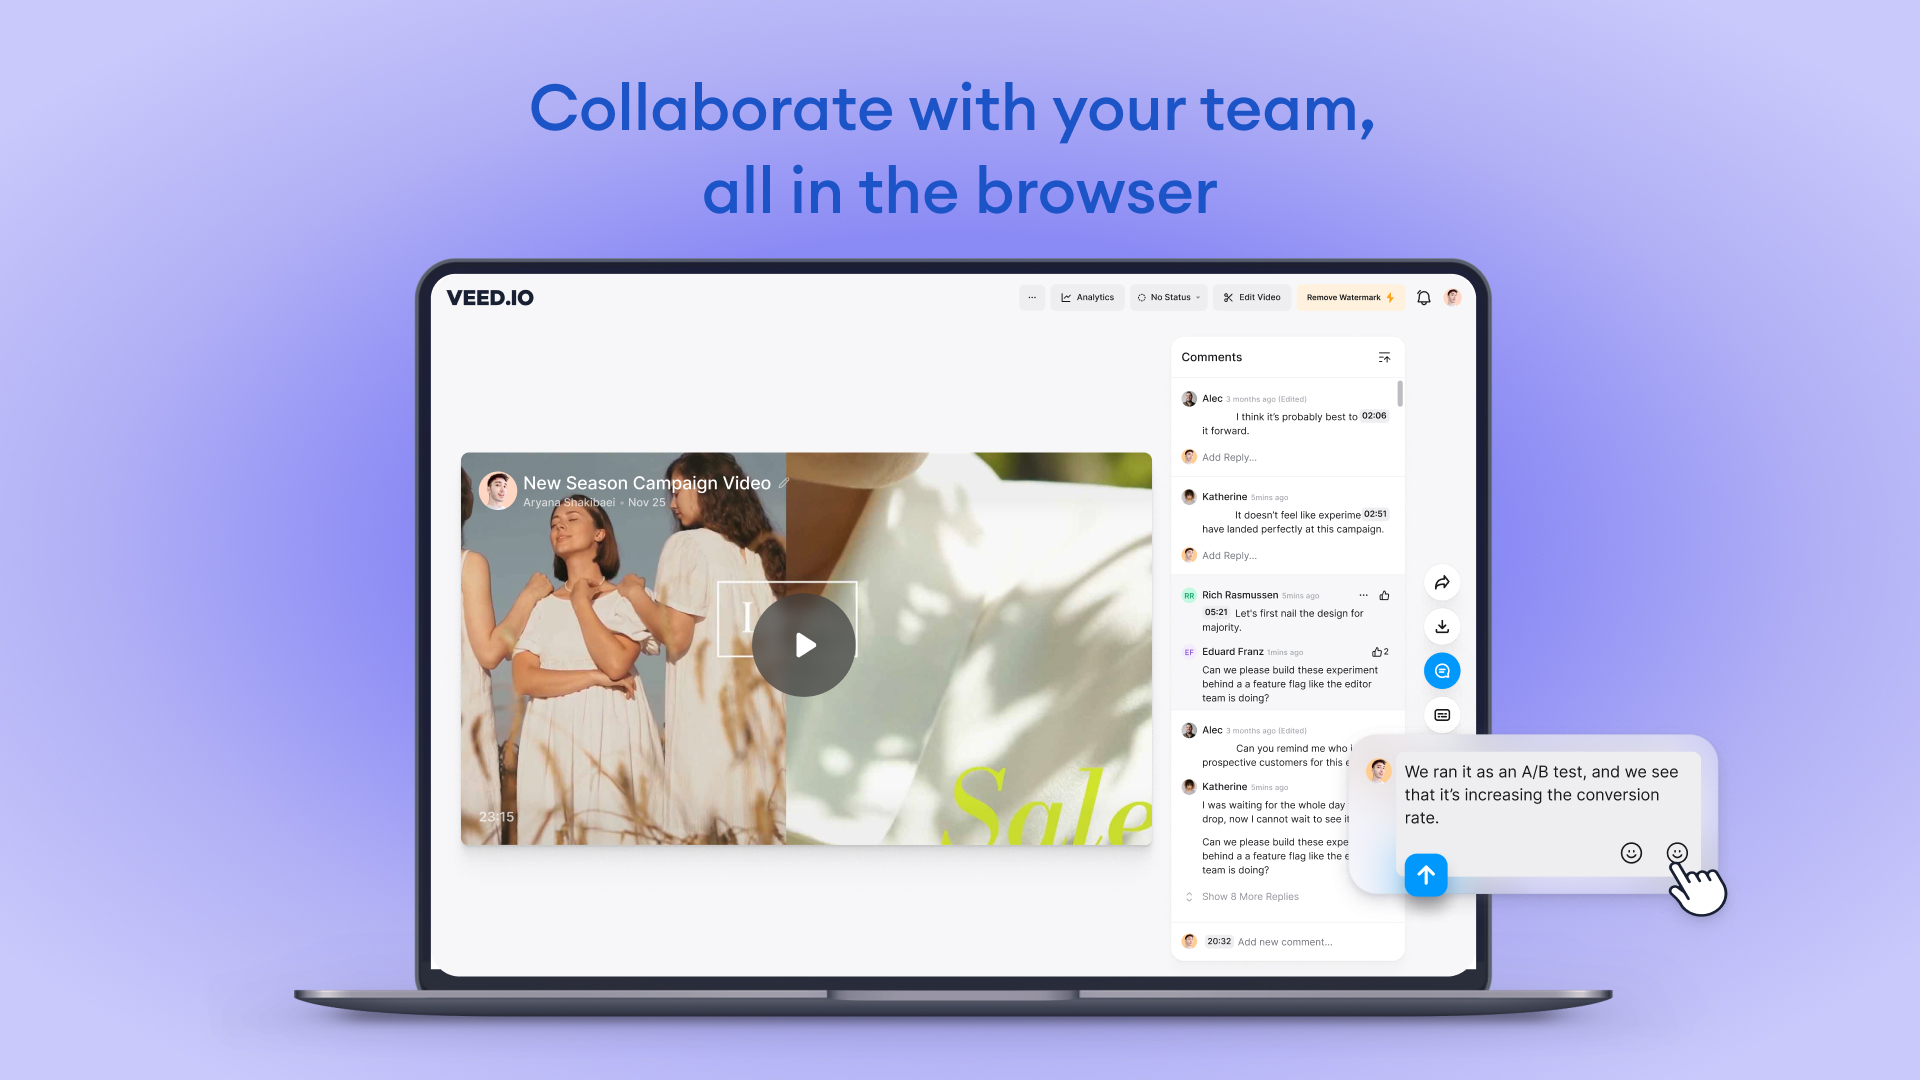 Work collaboratively - All in the browser